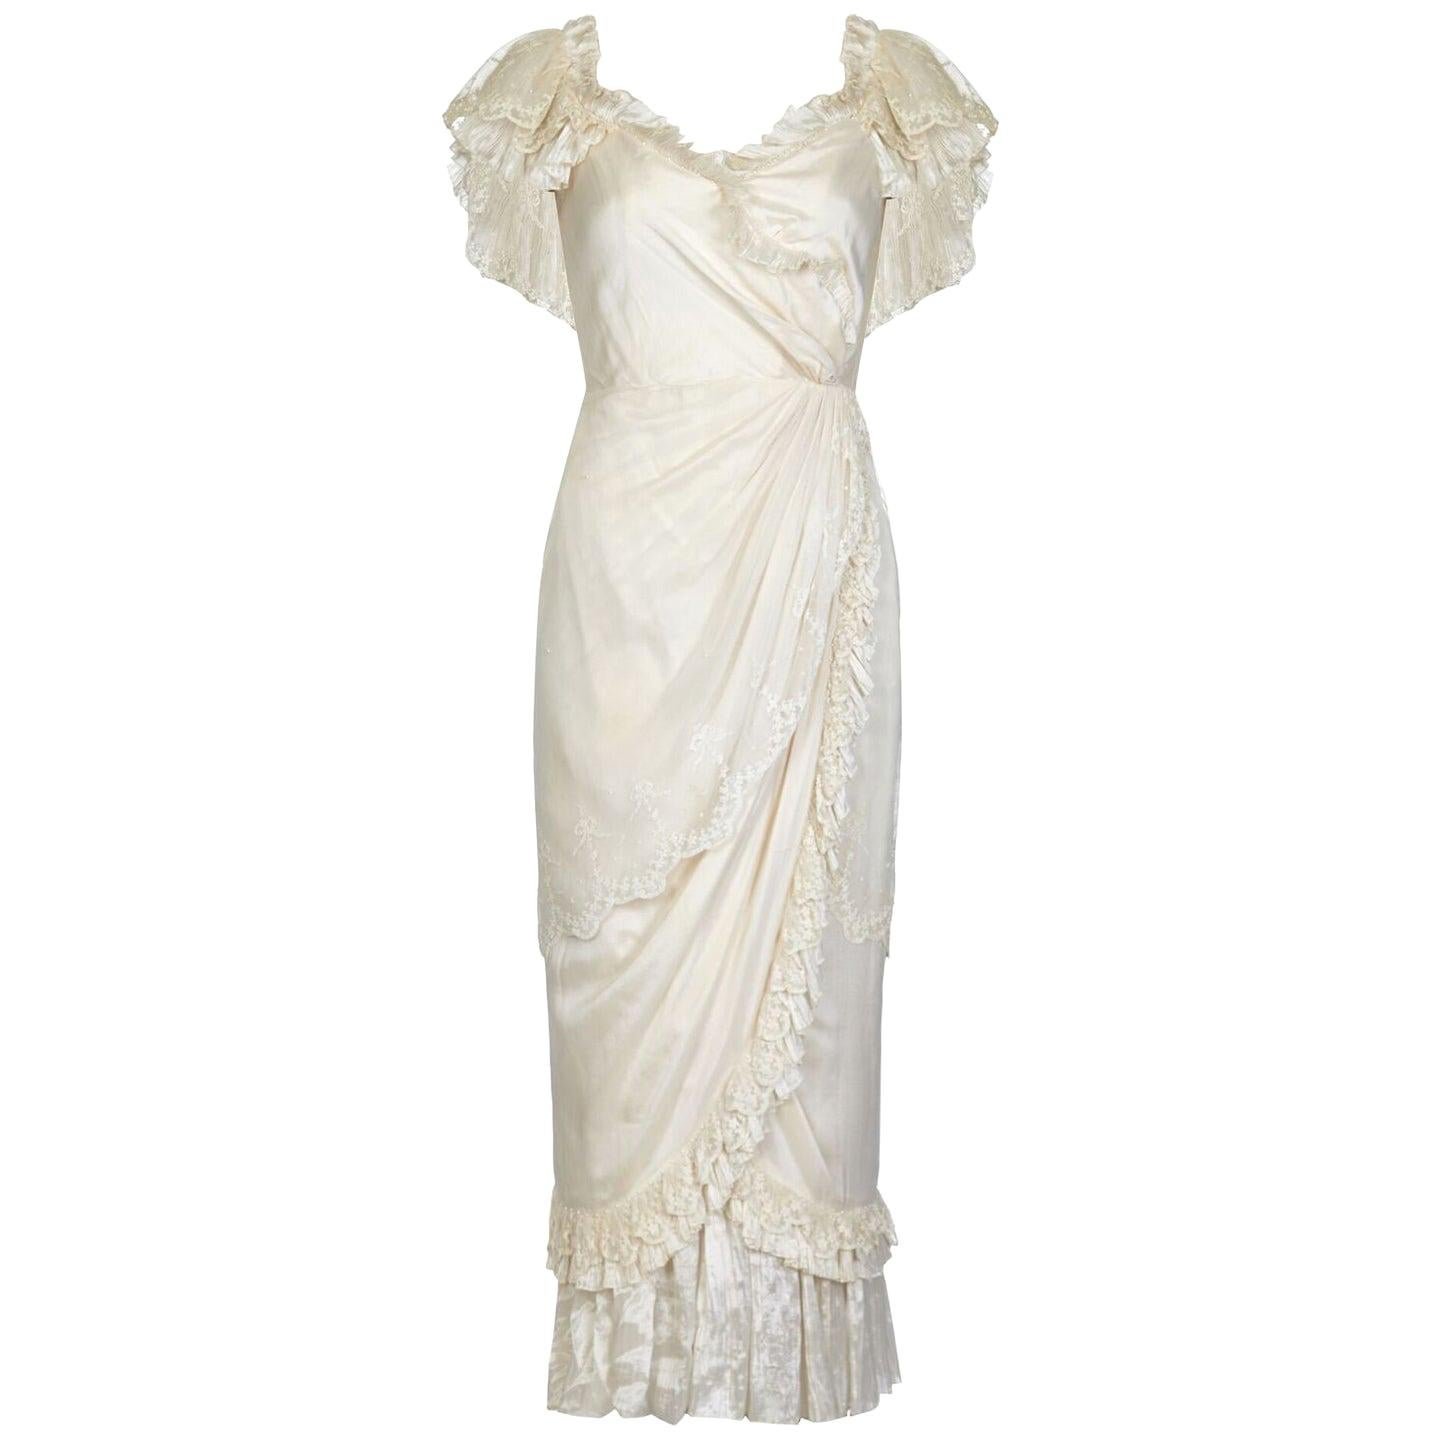 This exquisite Andrea Wilkin 1970s fantasy bridal gown in soft ivory exudes femininity and is in wonderful condition. Layers of silk fabric are beautifully arranged to create the classical romantic look reminiscent of the Edwardian era for which